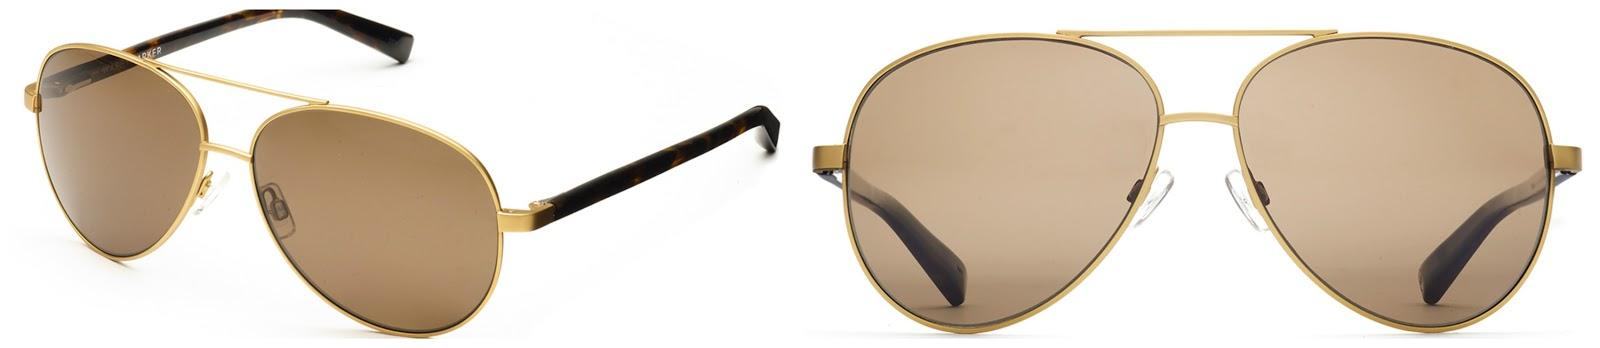 WARBY PARKER - MERIDIAN COLLECTION